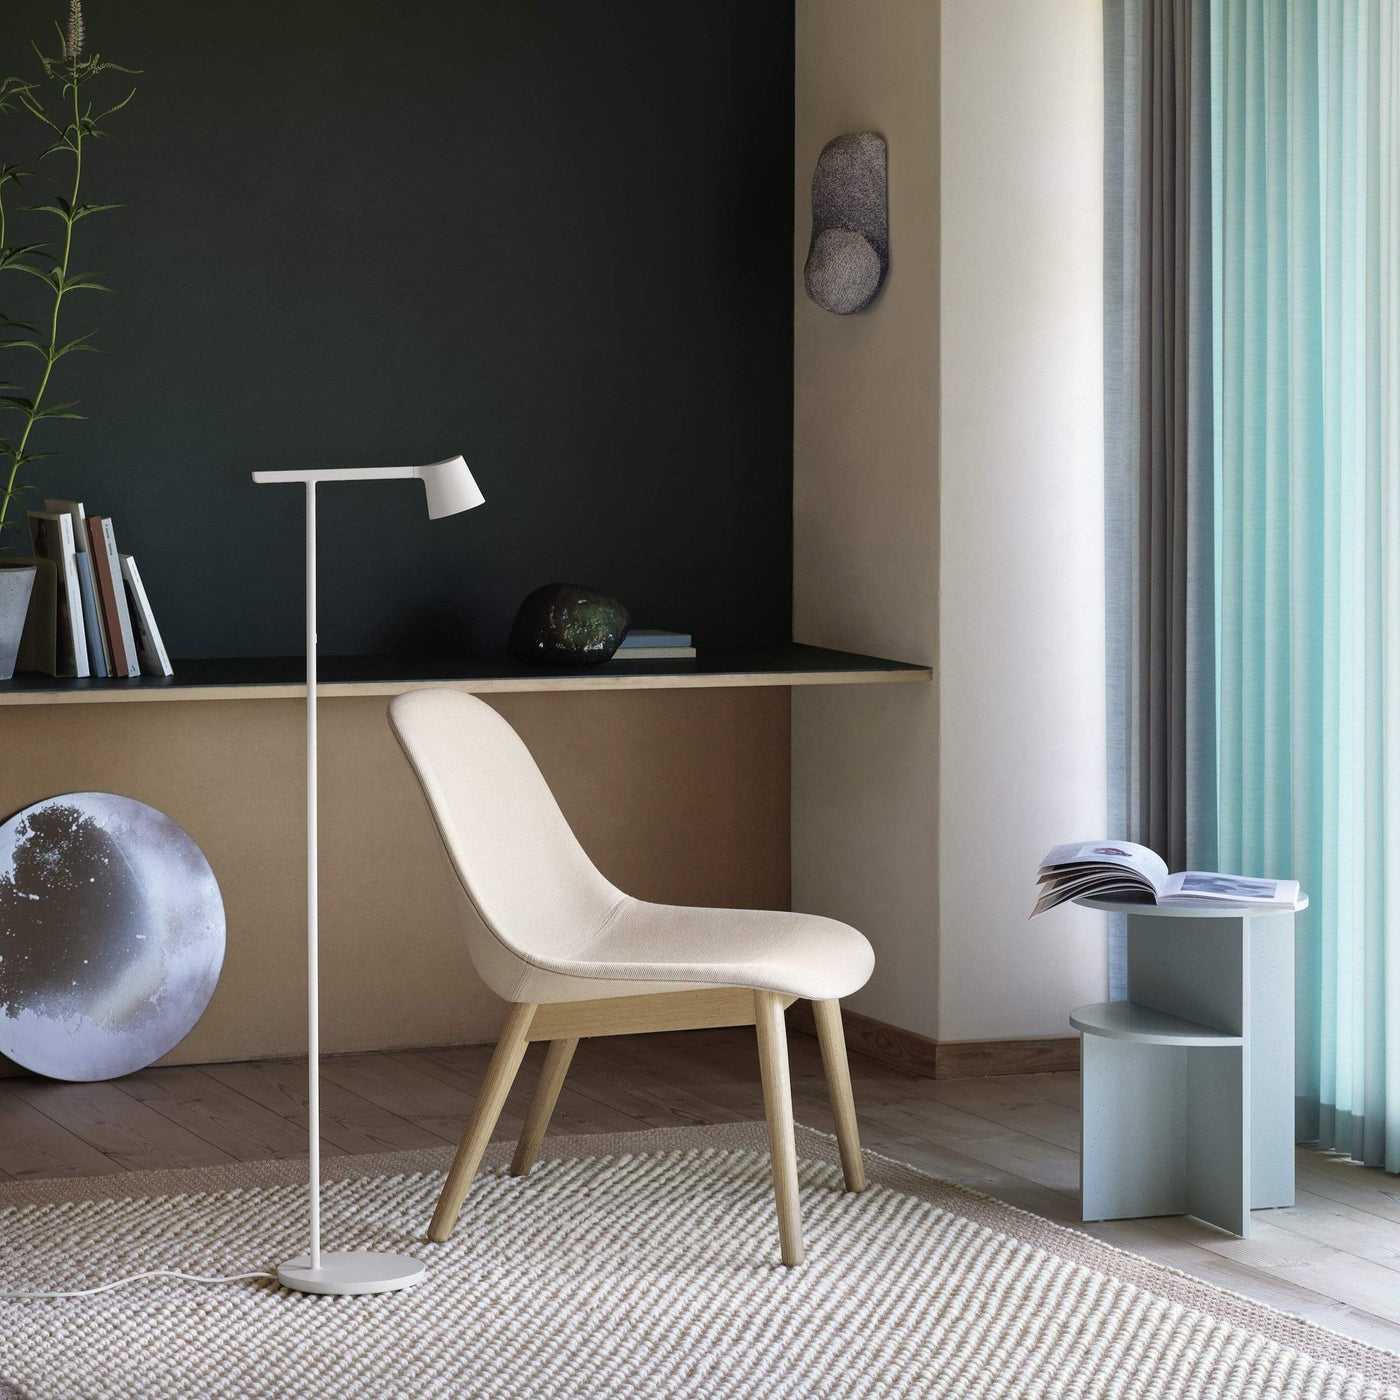 Muuto Tip Floor Lamp in grey. Available from someday designs. #colour_grey